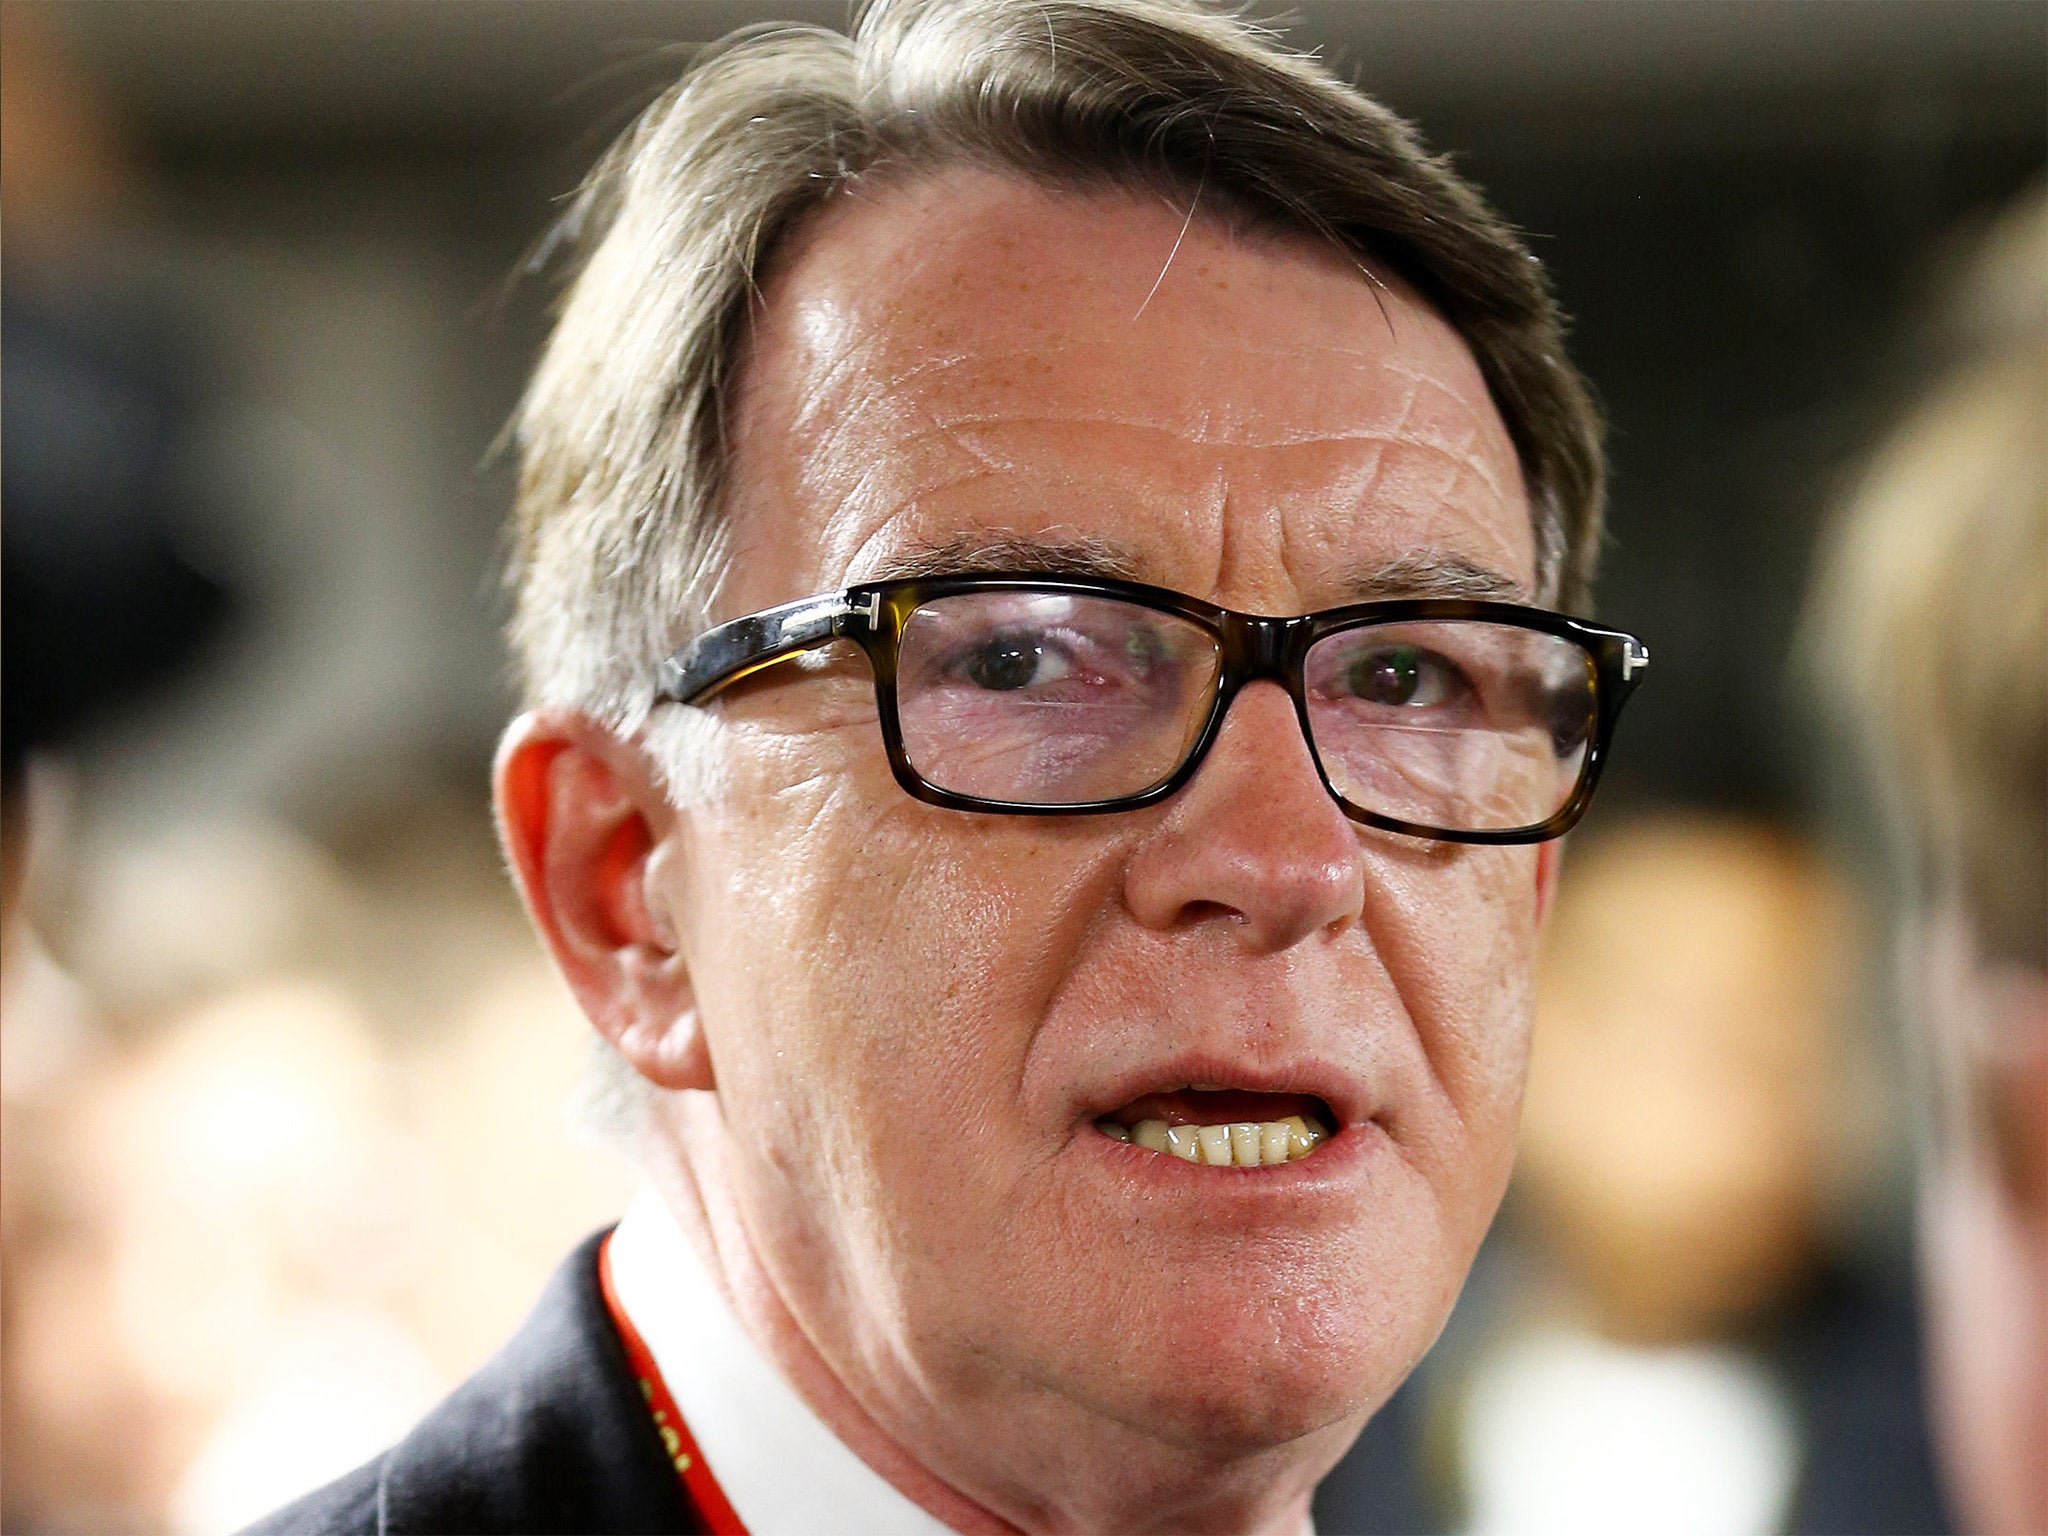 Lord Mandelson also suggested a cost to the North in terms of GDP growth and up to 50,000 jobs